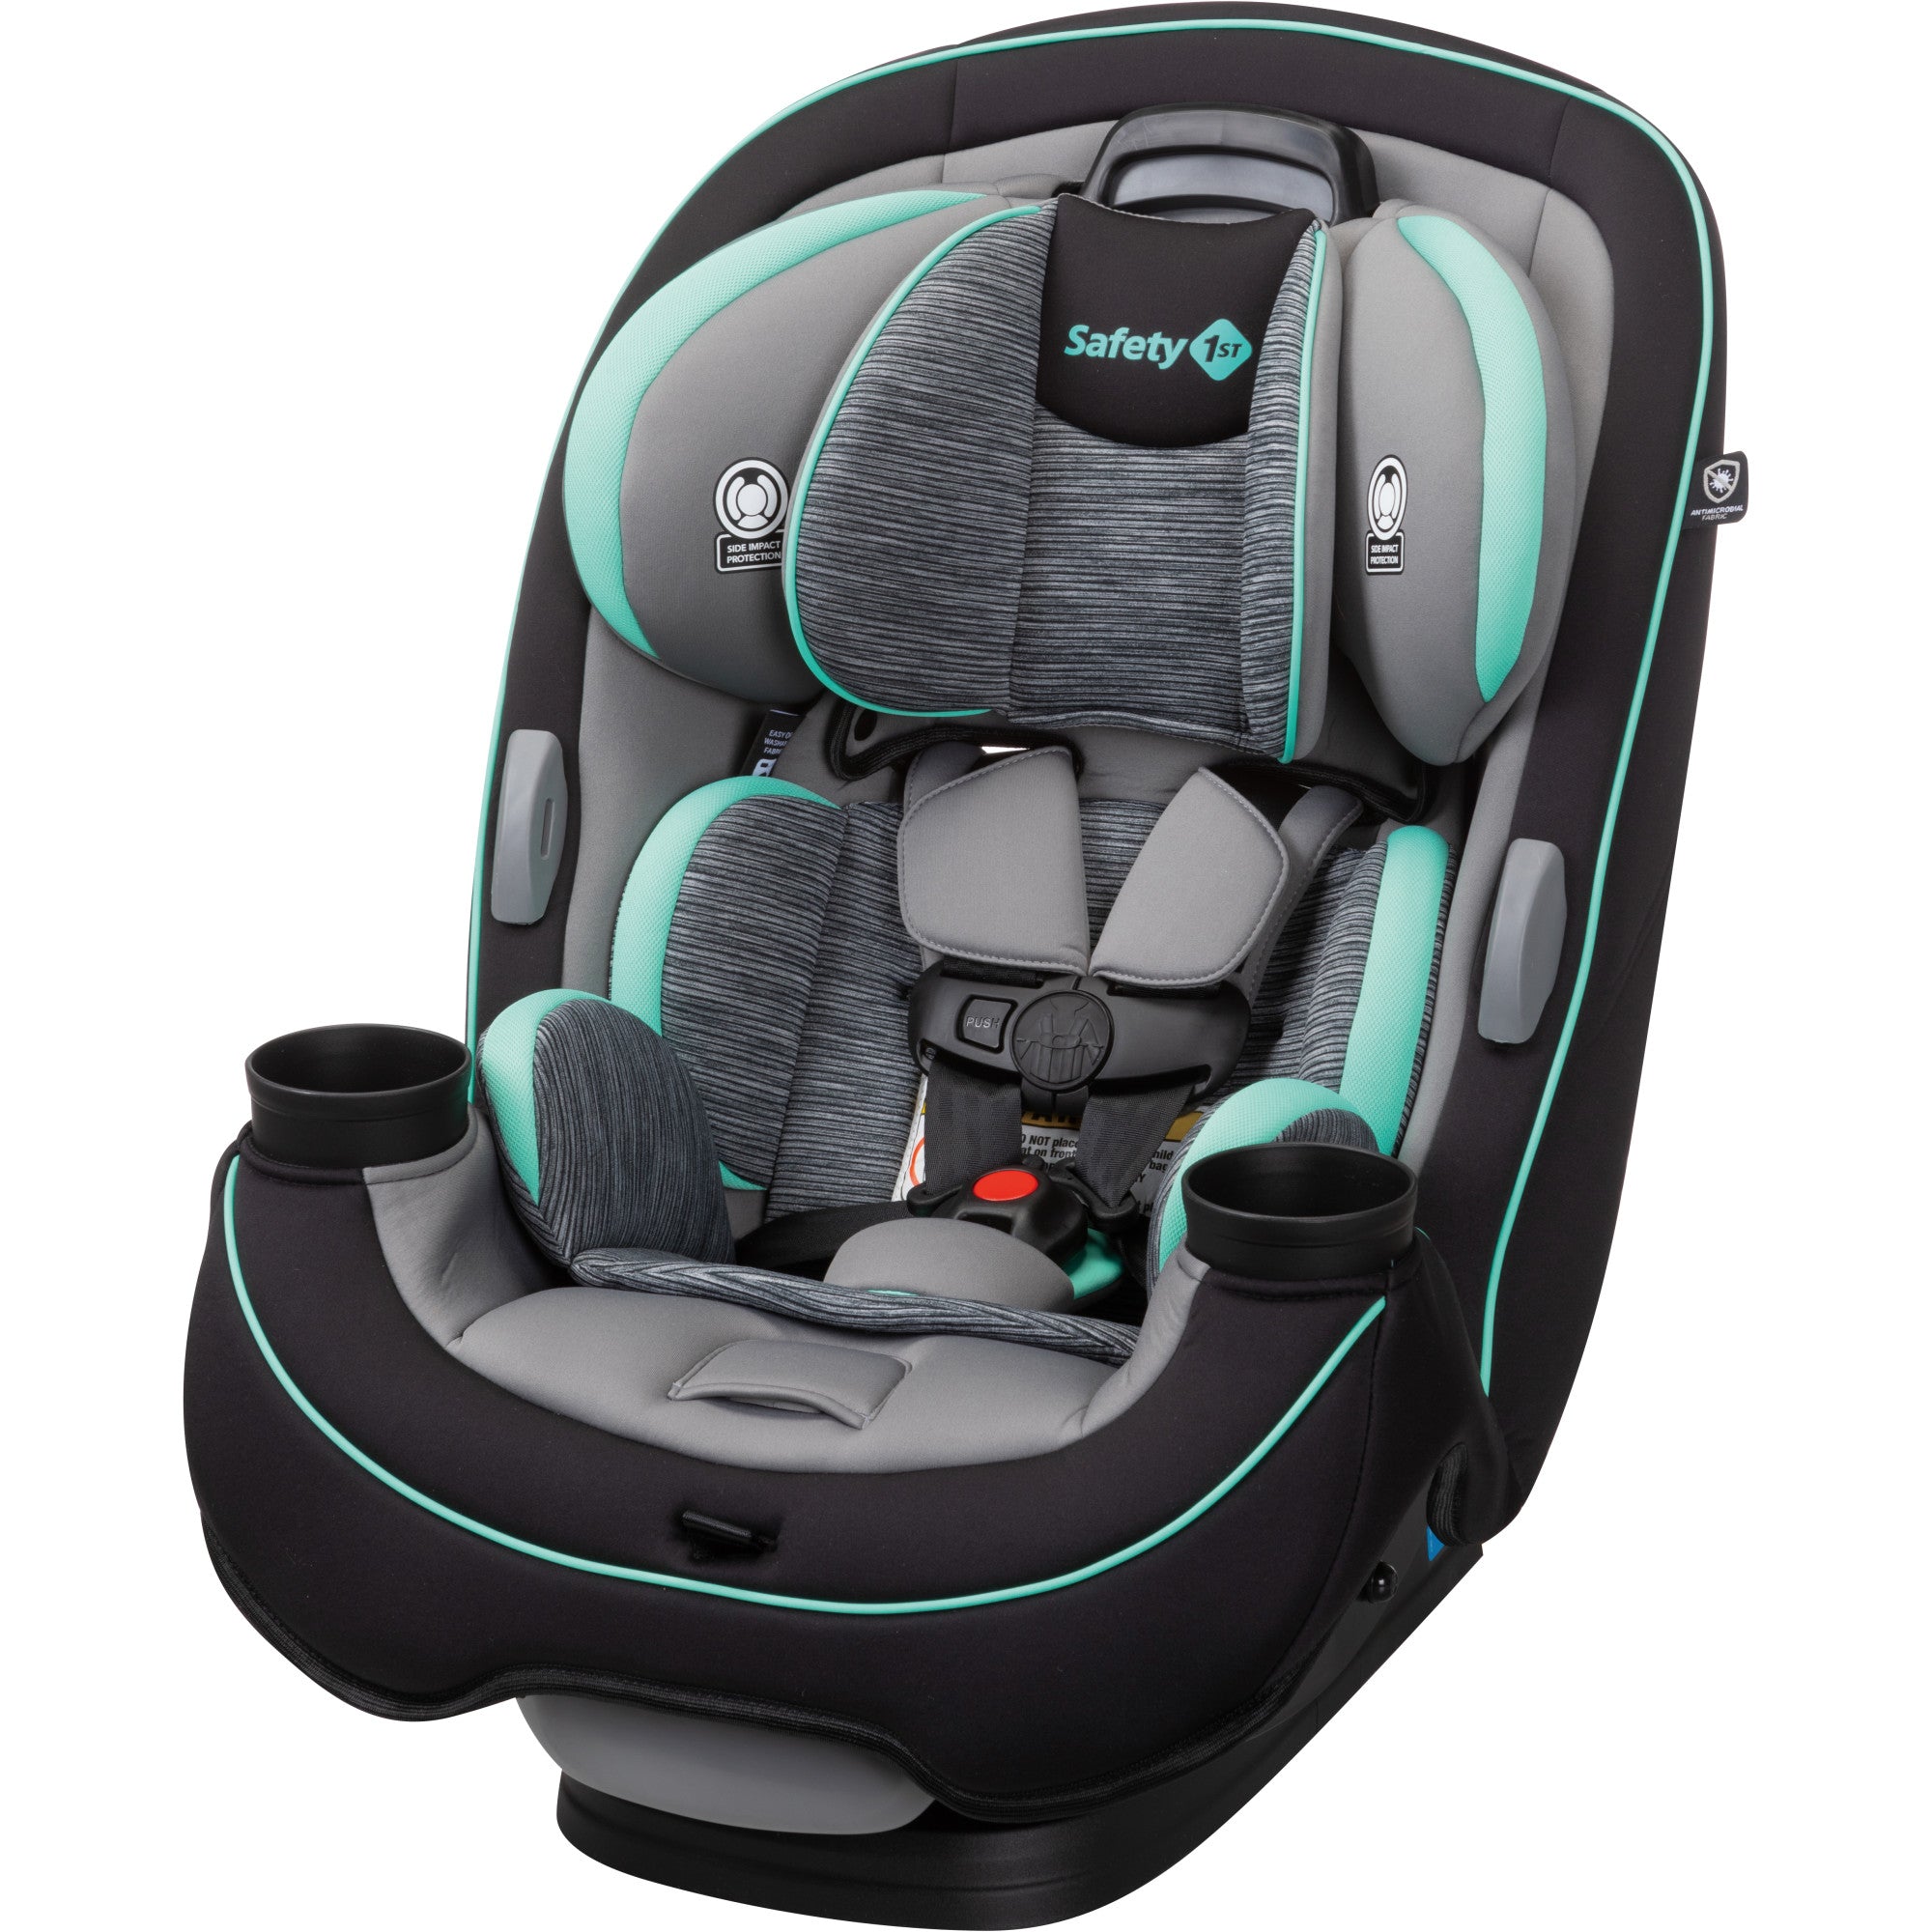 Safety 1st car seat in grey and black with turquoise trim